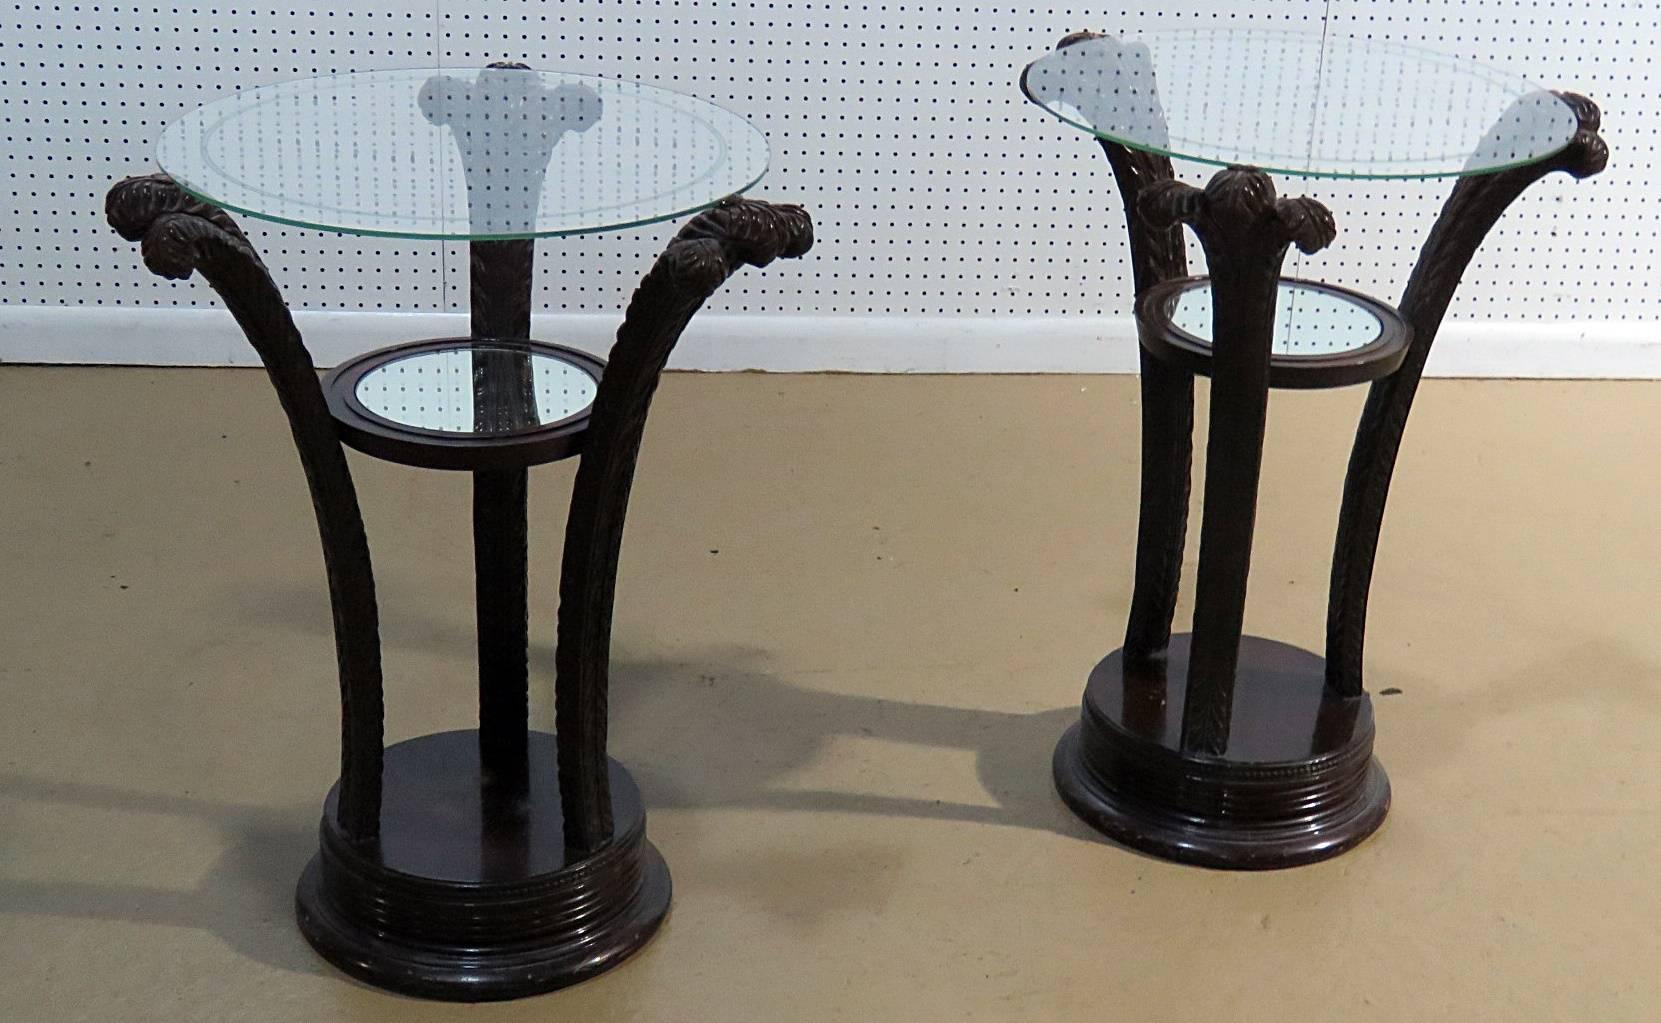 Pair of Hollywood Regency style glass top end tables with Prince of Wales feather style bases.